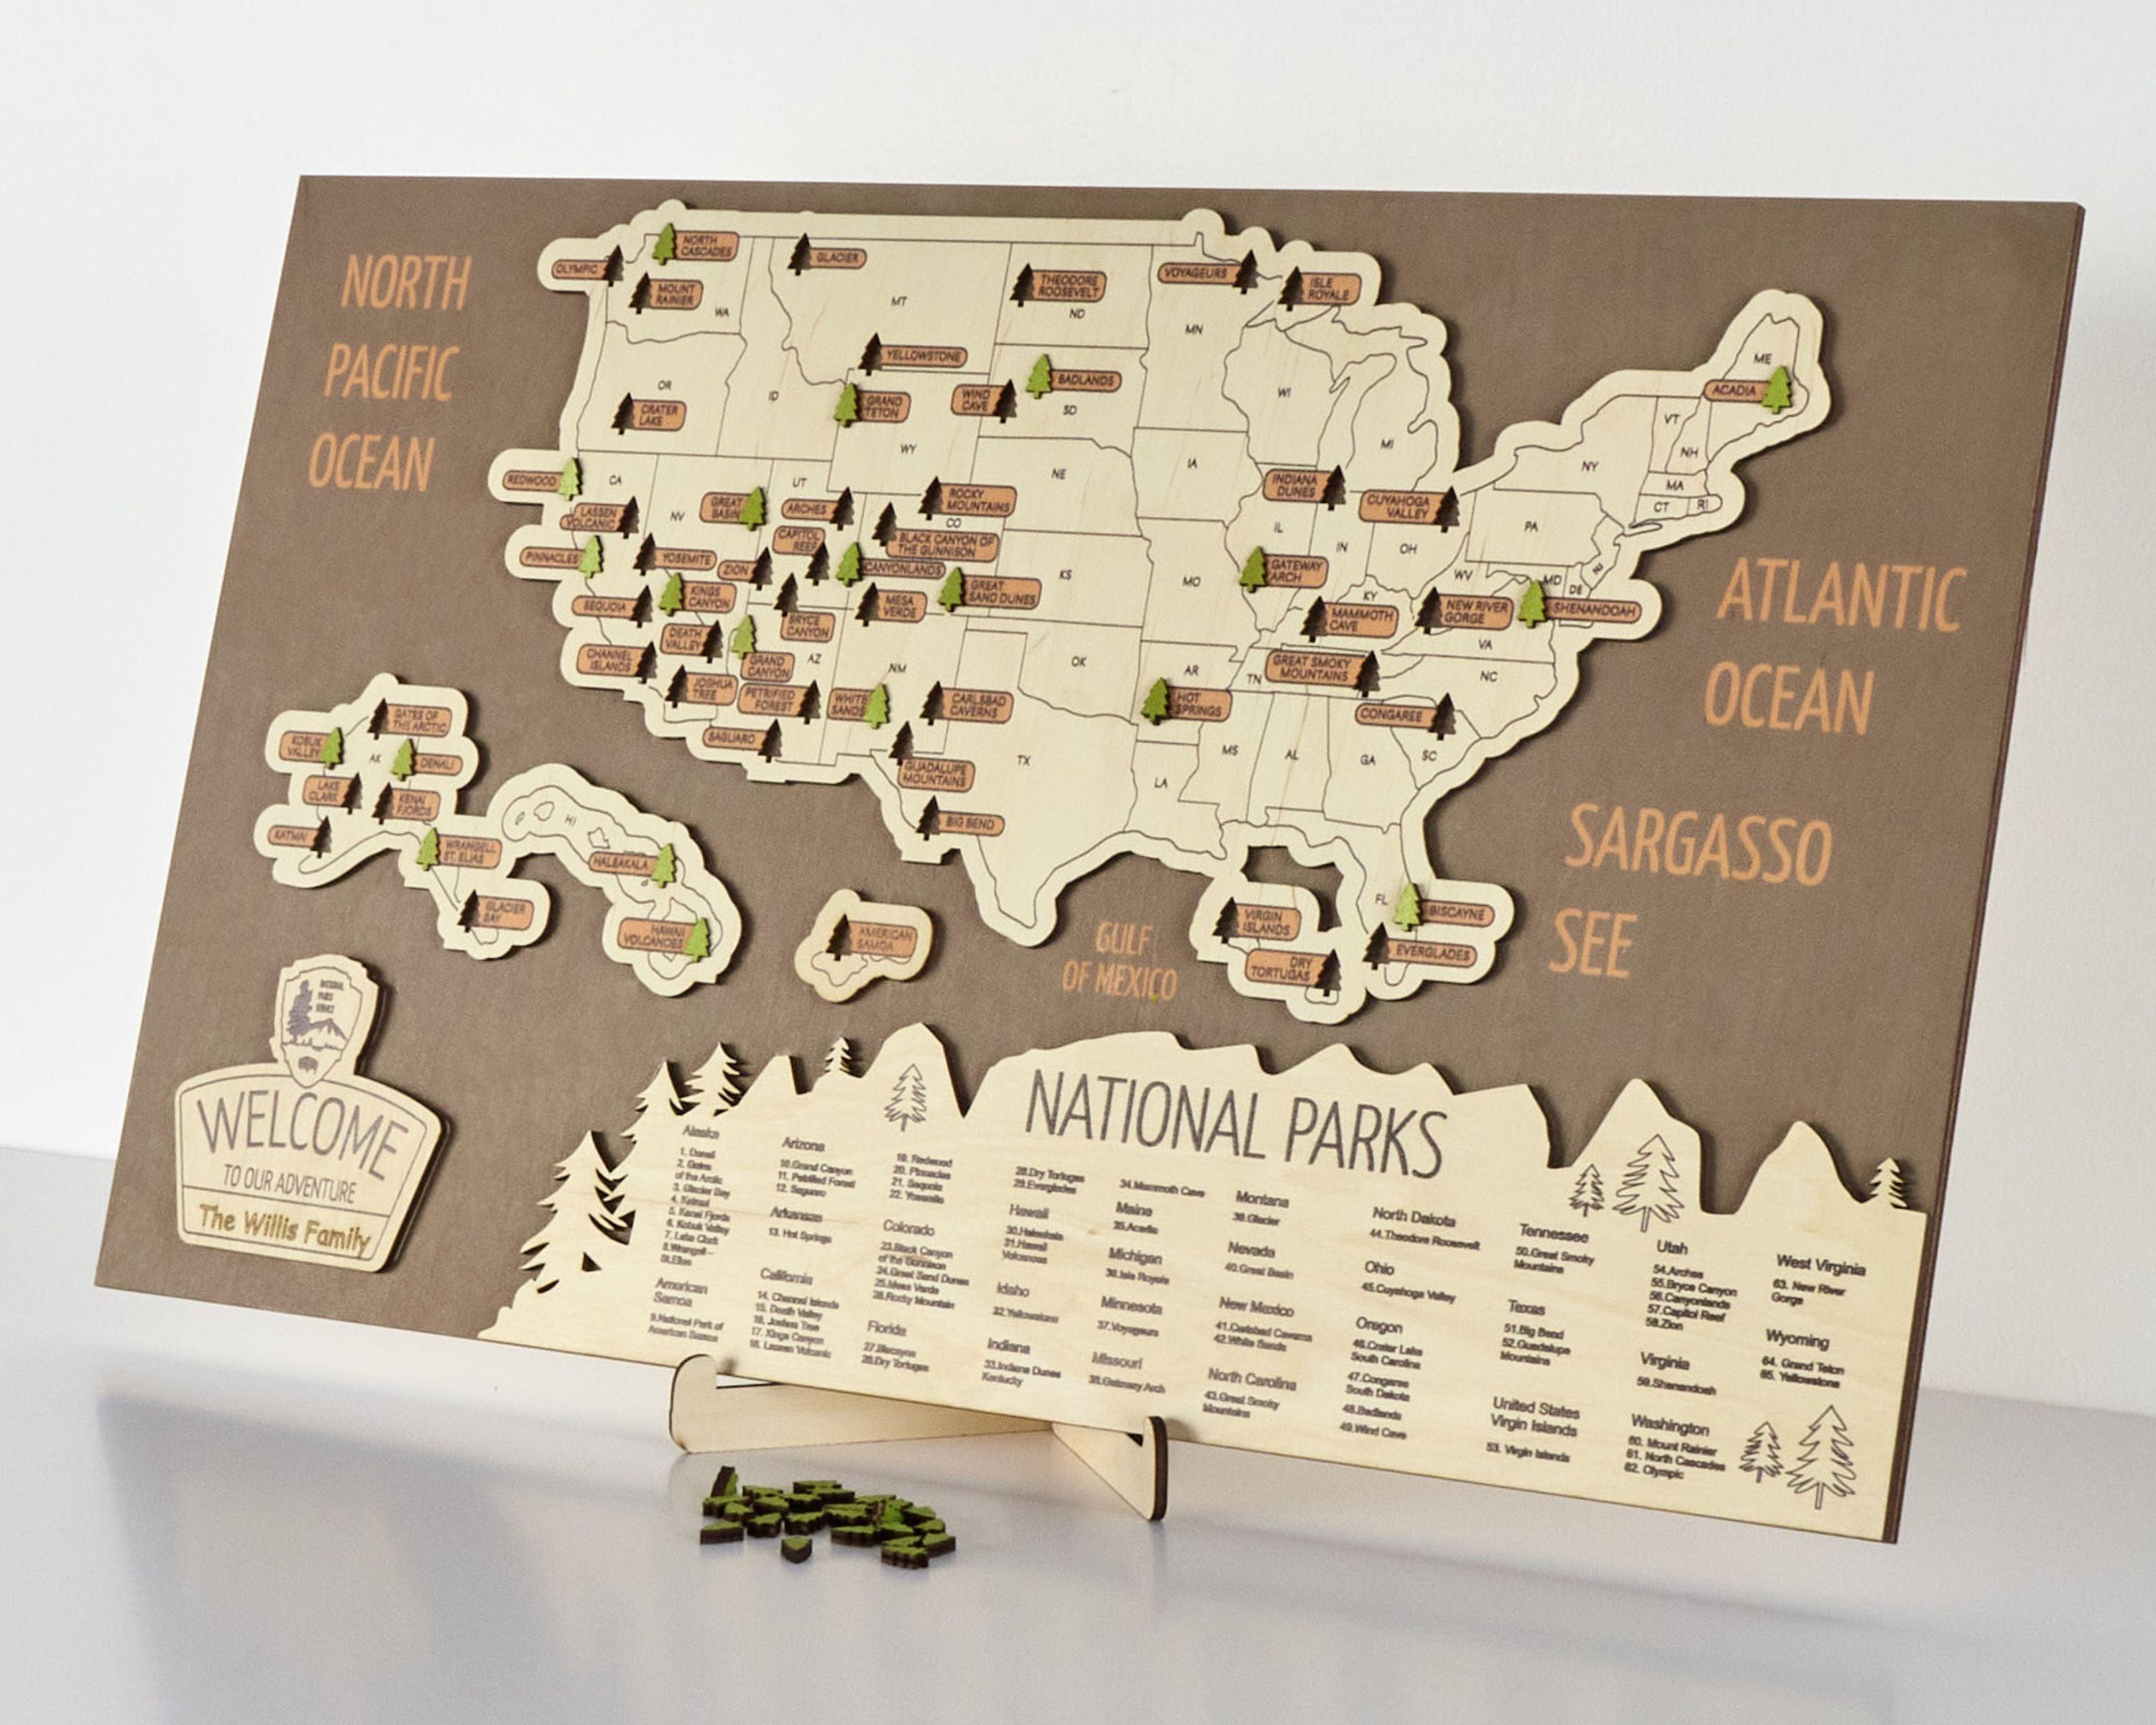 US 3D Wooden National Parks Travel Map With Trees To Record Park Visits (New Brown)